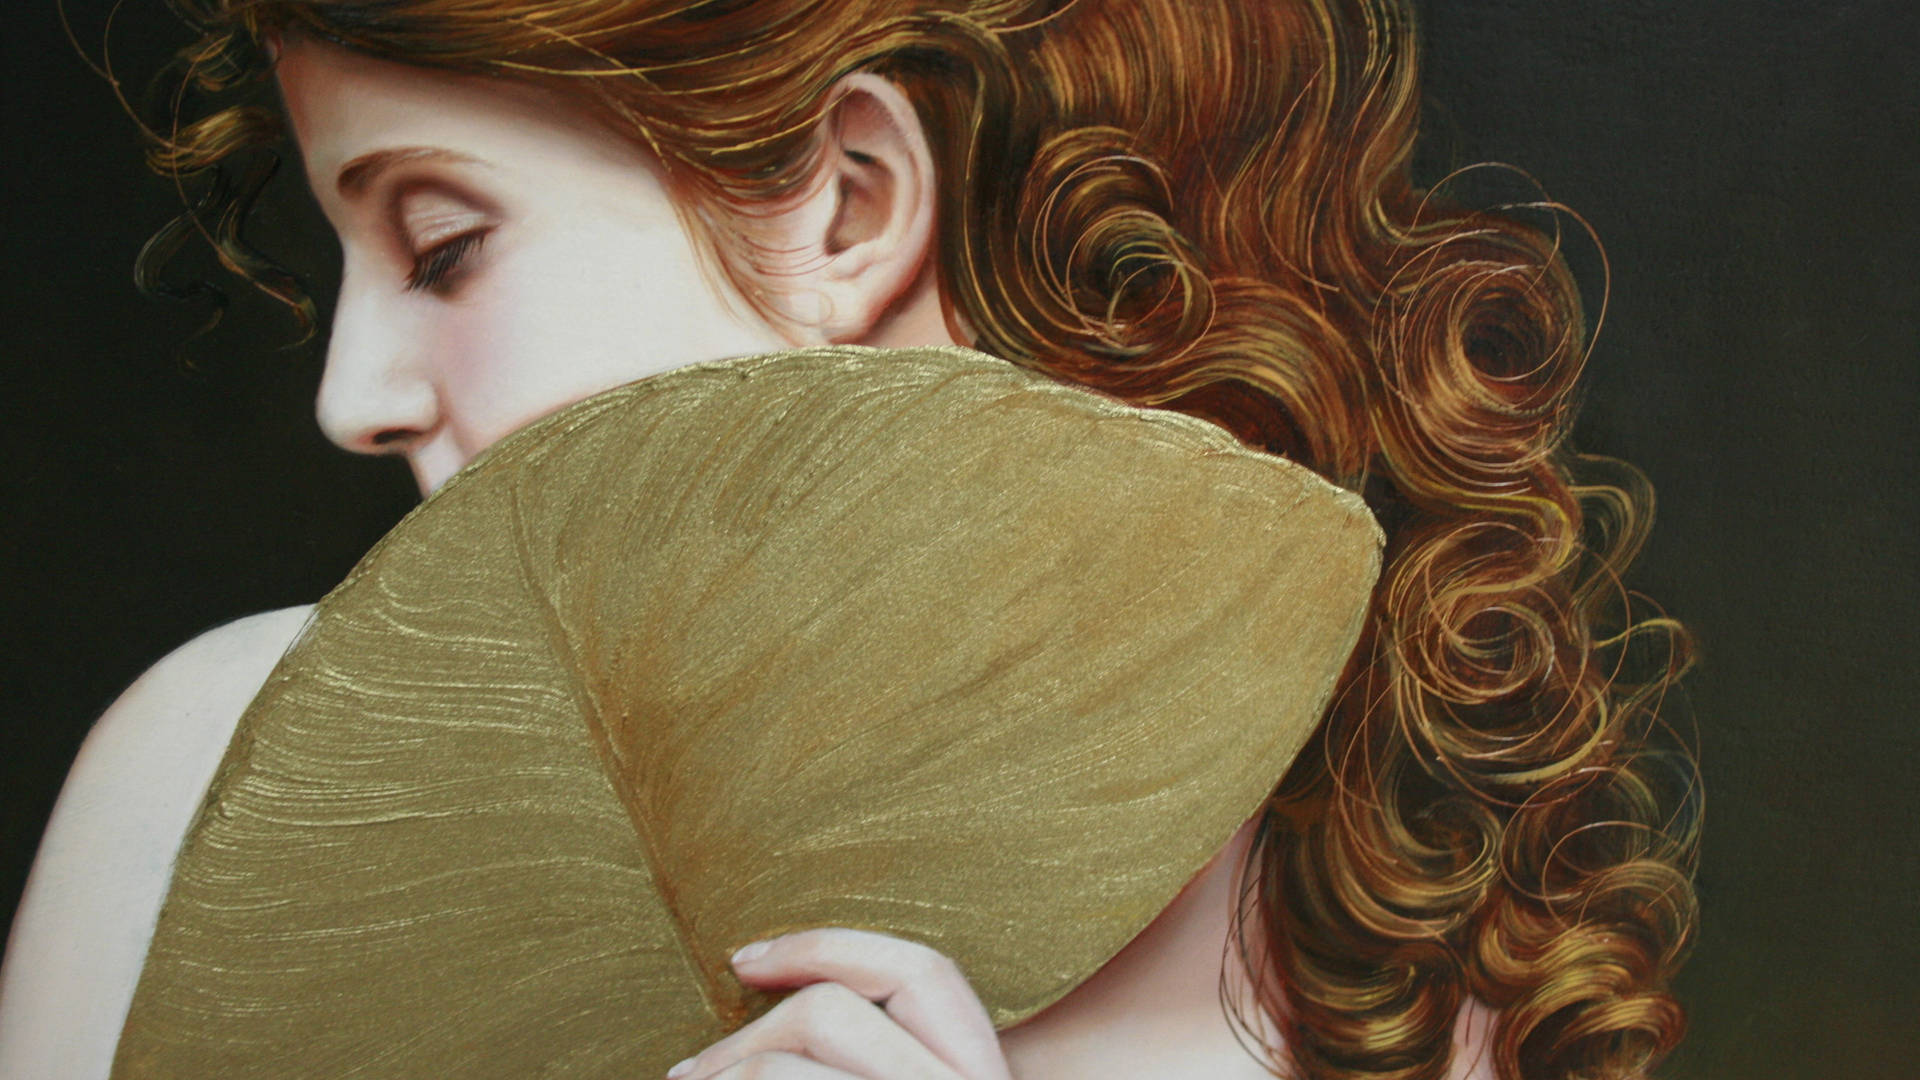 Red Hair Woman Painting By Christiane Vleugels